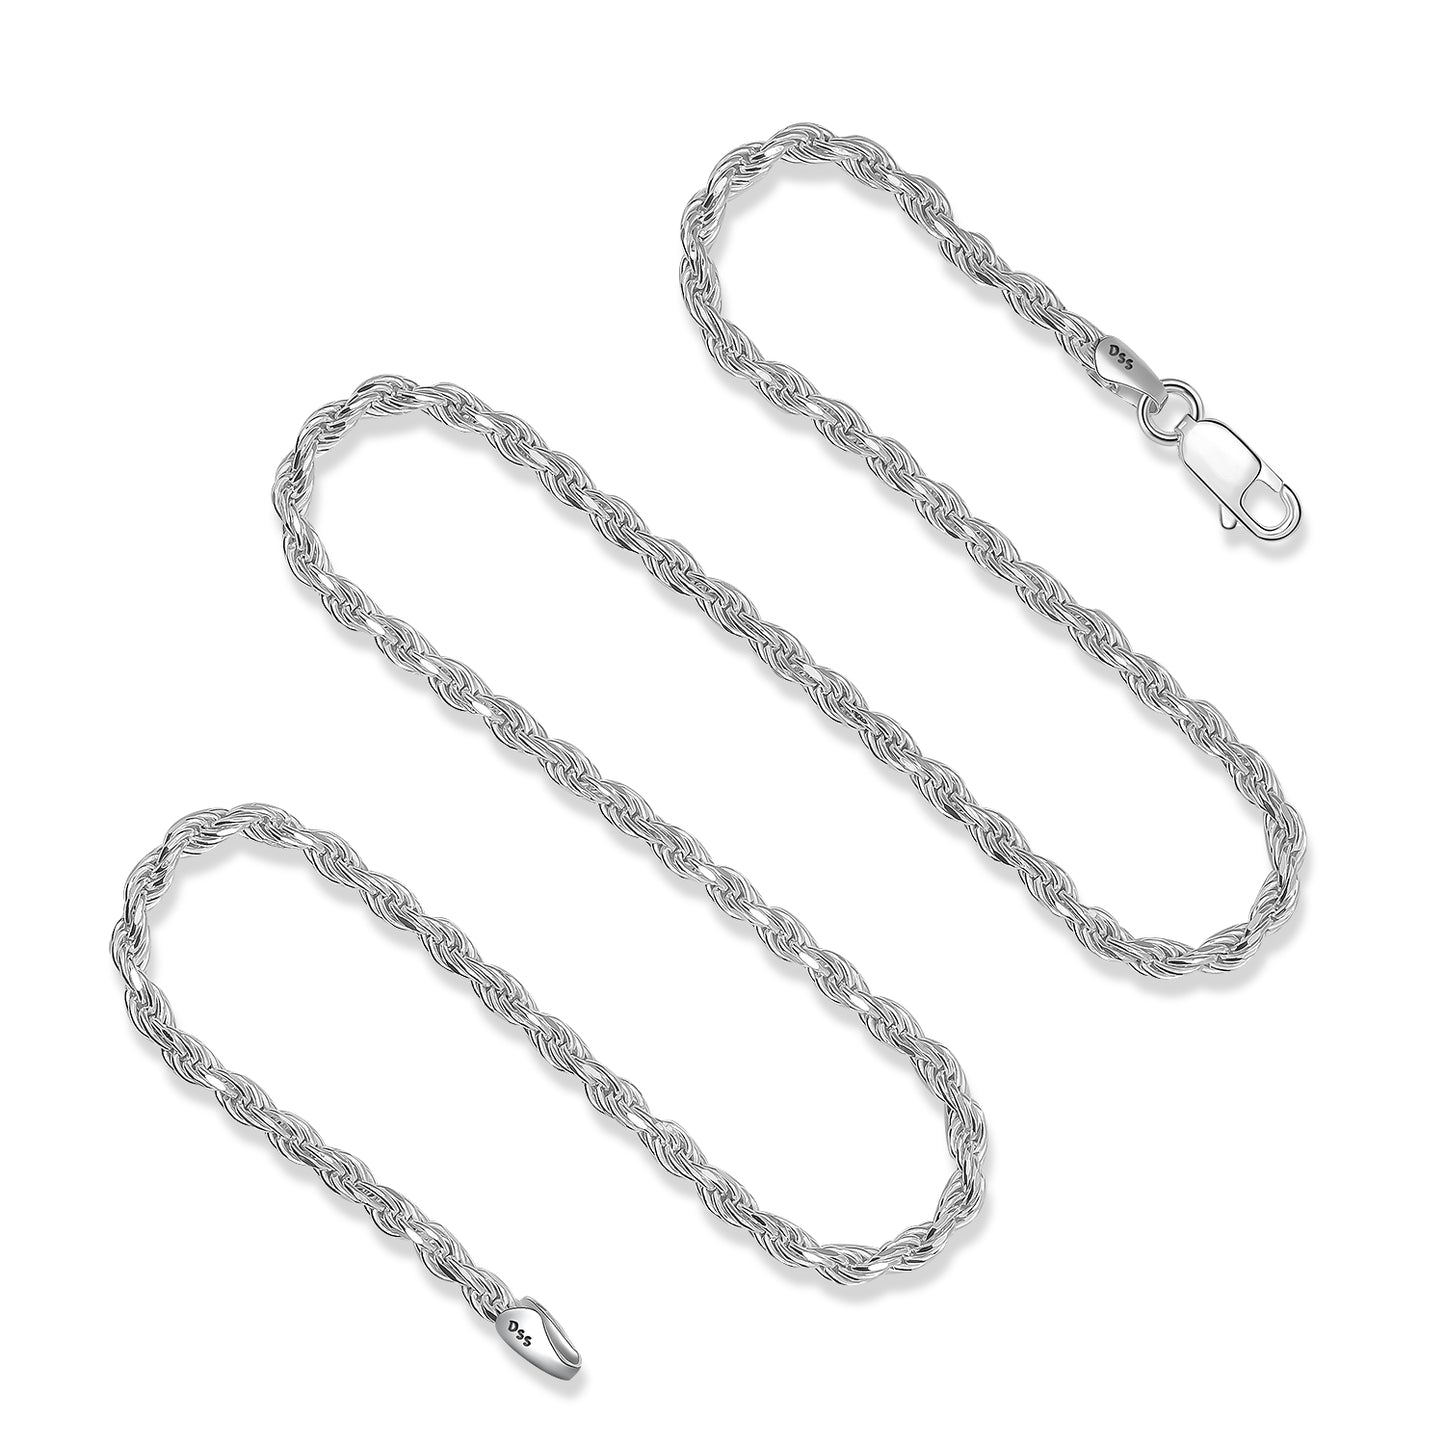 925 Sterling Silver 3MM Rope Chain - Nickel Free Italian Crafted Necklace for Women and Men 16 - 36". 16", 18", 20", 22", 24", 30", 36". strong rope chain. Great for pendants.